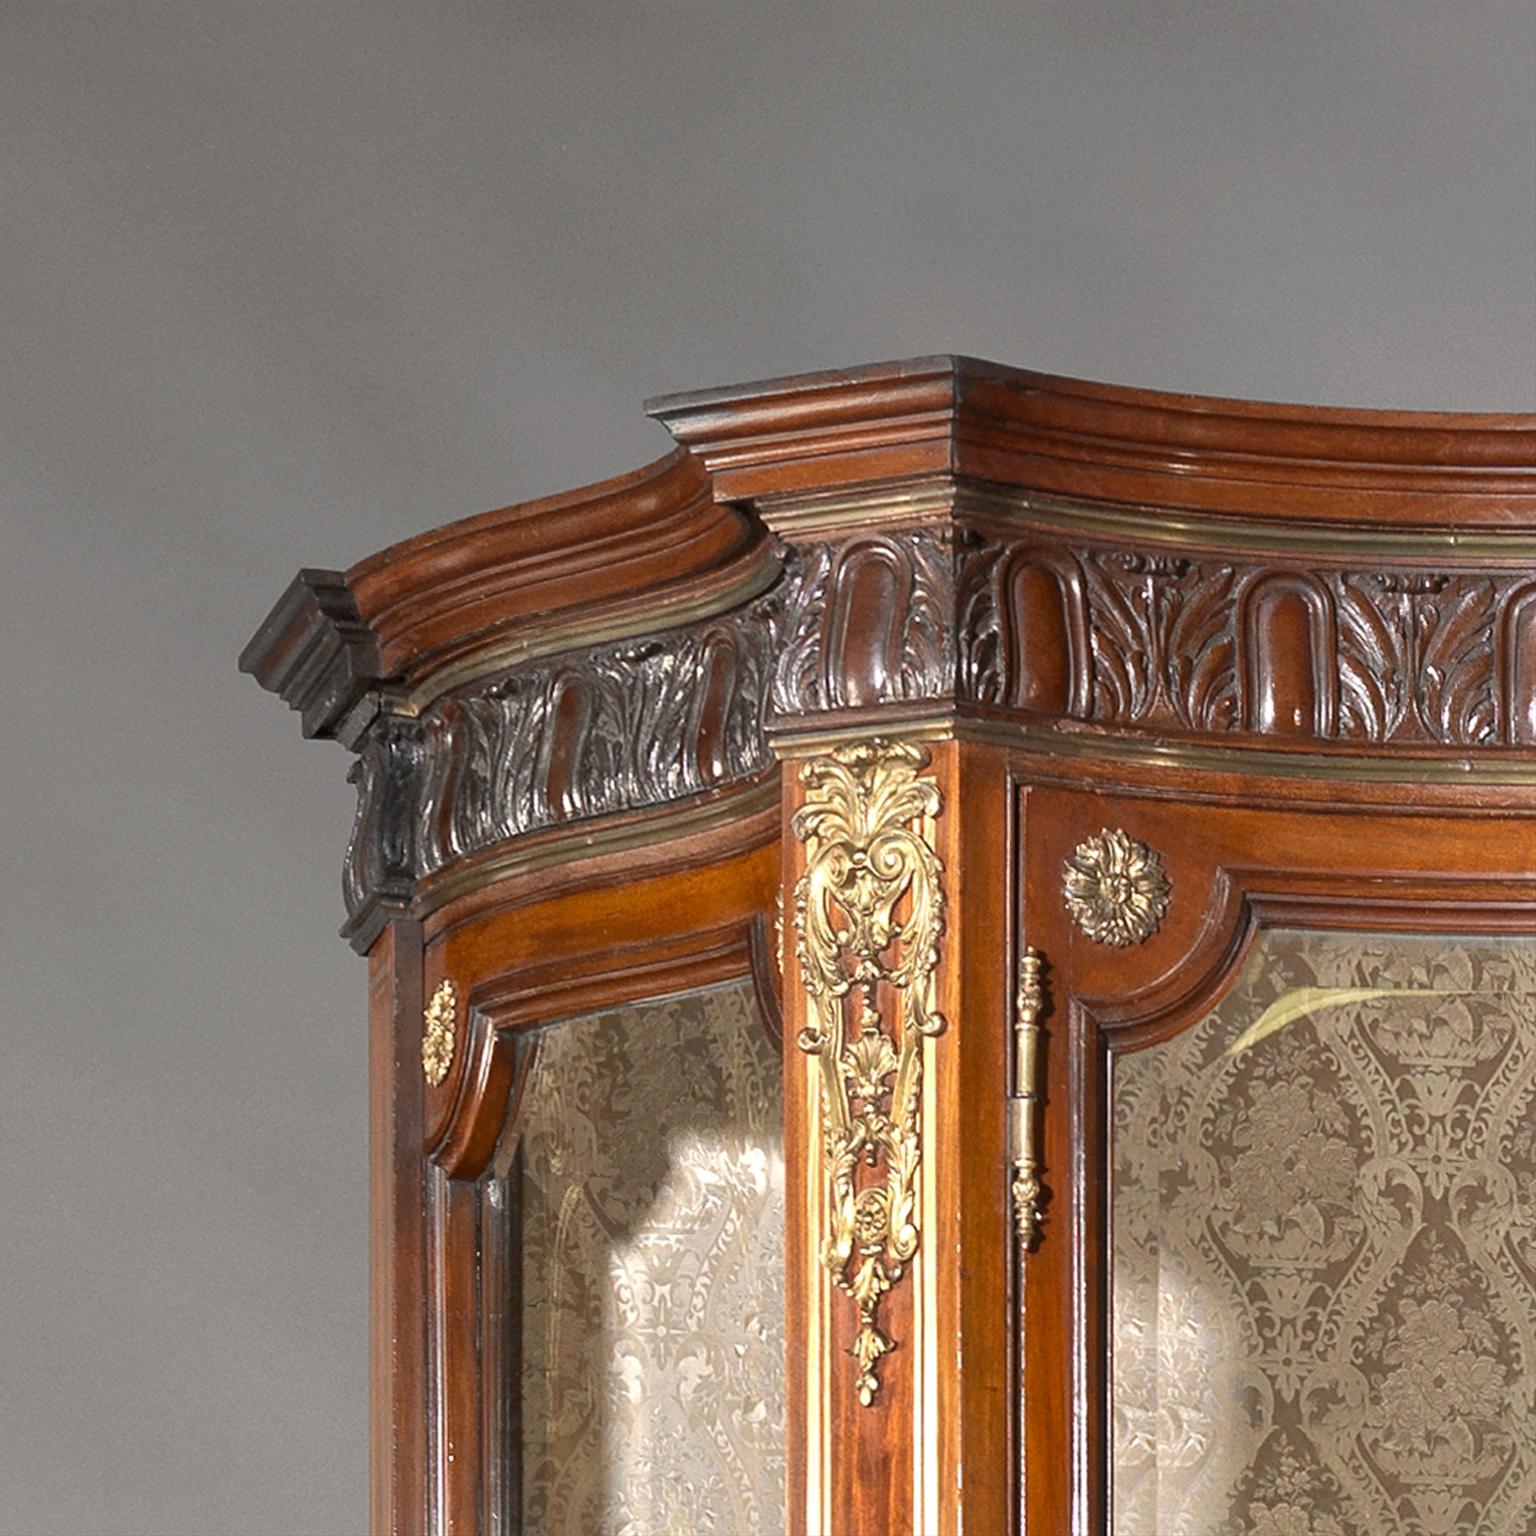 An impressive large gilt-bronze mounted mahogany vitrine.

This impressive vitrine has a shaped cresting rail carved with acanthus above a pair of shaped doors with bevelled glass panels and canted corners applied gilt-bronze flowerhead paterae.